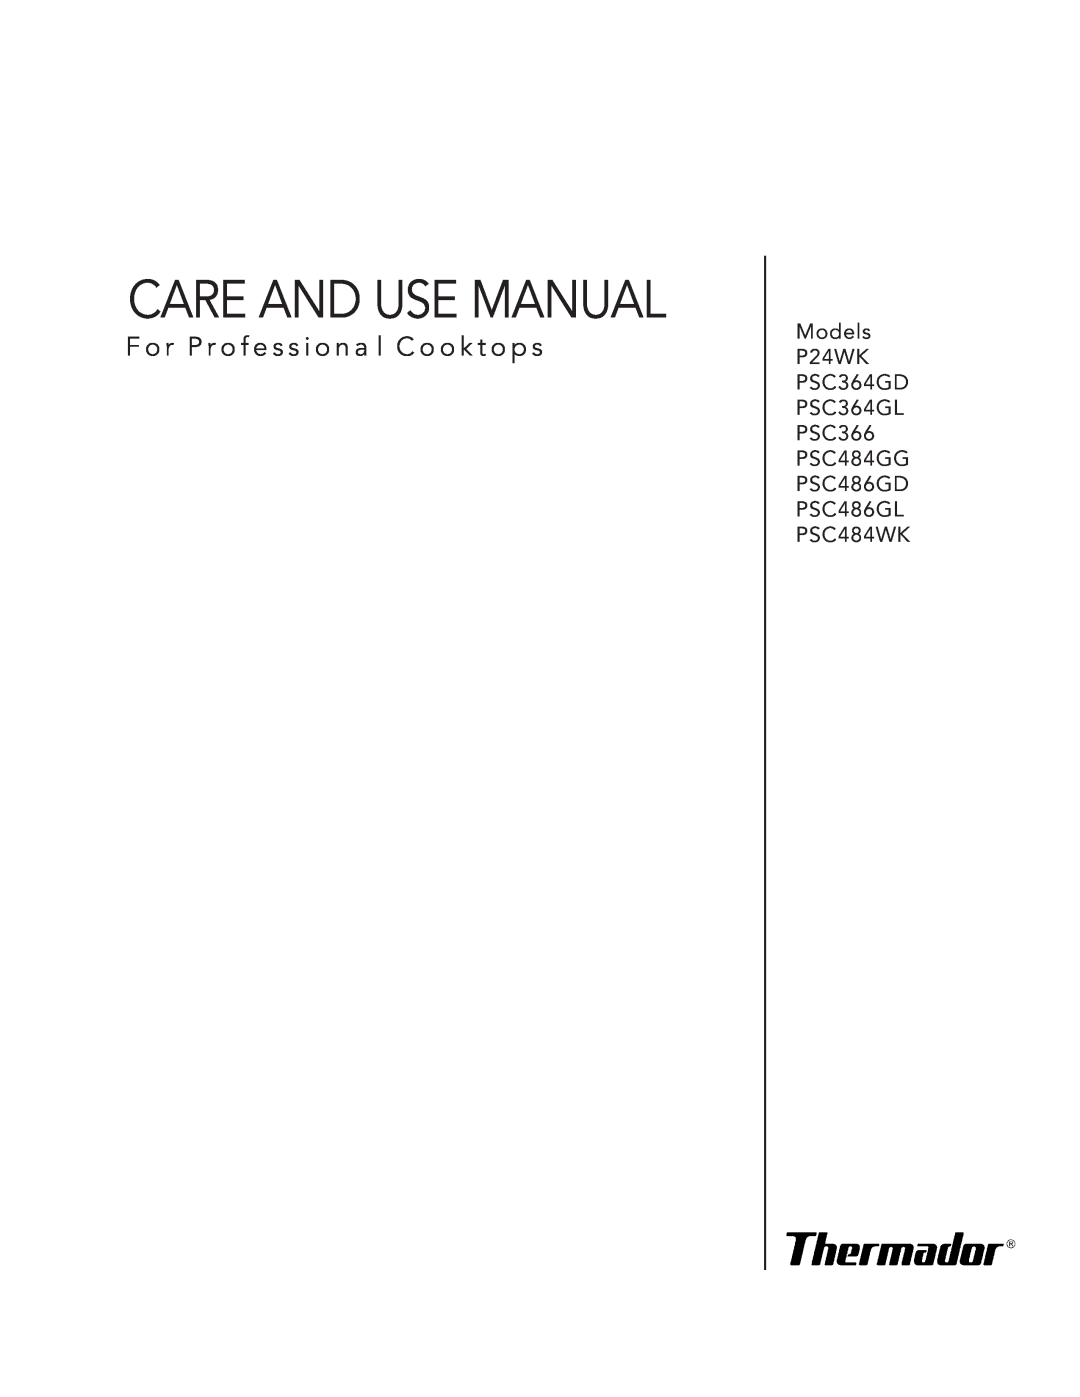 Thermador PSC364GD, PSC366, PSC484WK, PSC486GD manual Care And Use Manual, F o r P r o f e s s i o n a l C o o k t o p s 